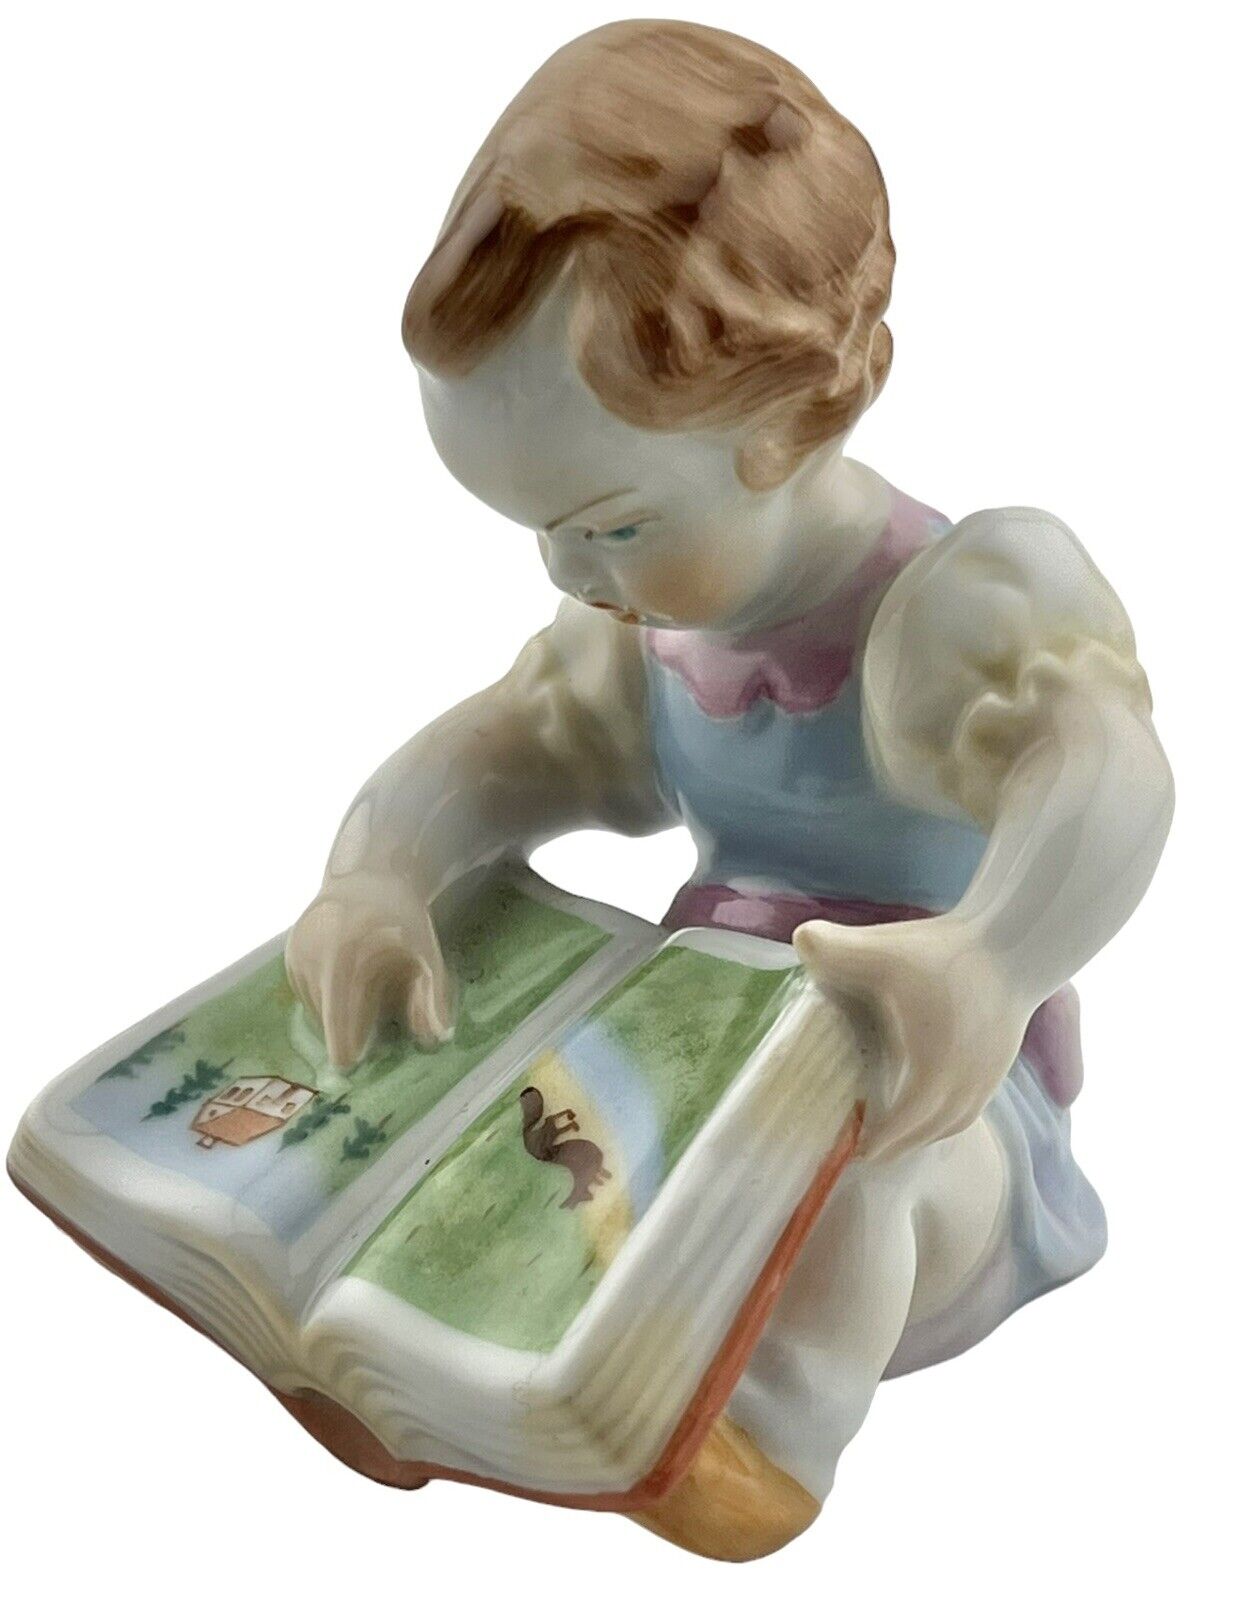 Vintage Herend Hungary Girl Figurine Reading Book Hand Painted Porcelain #5838